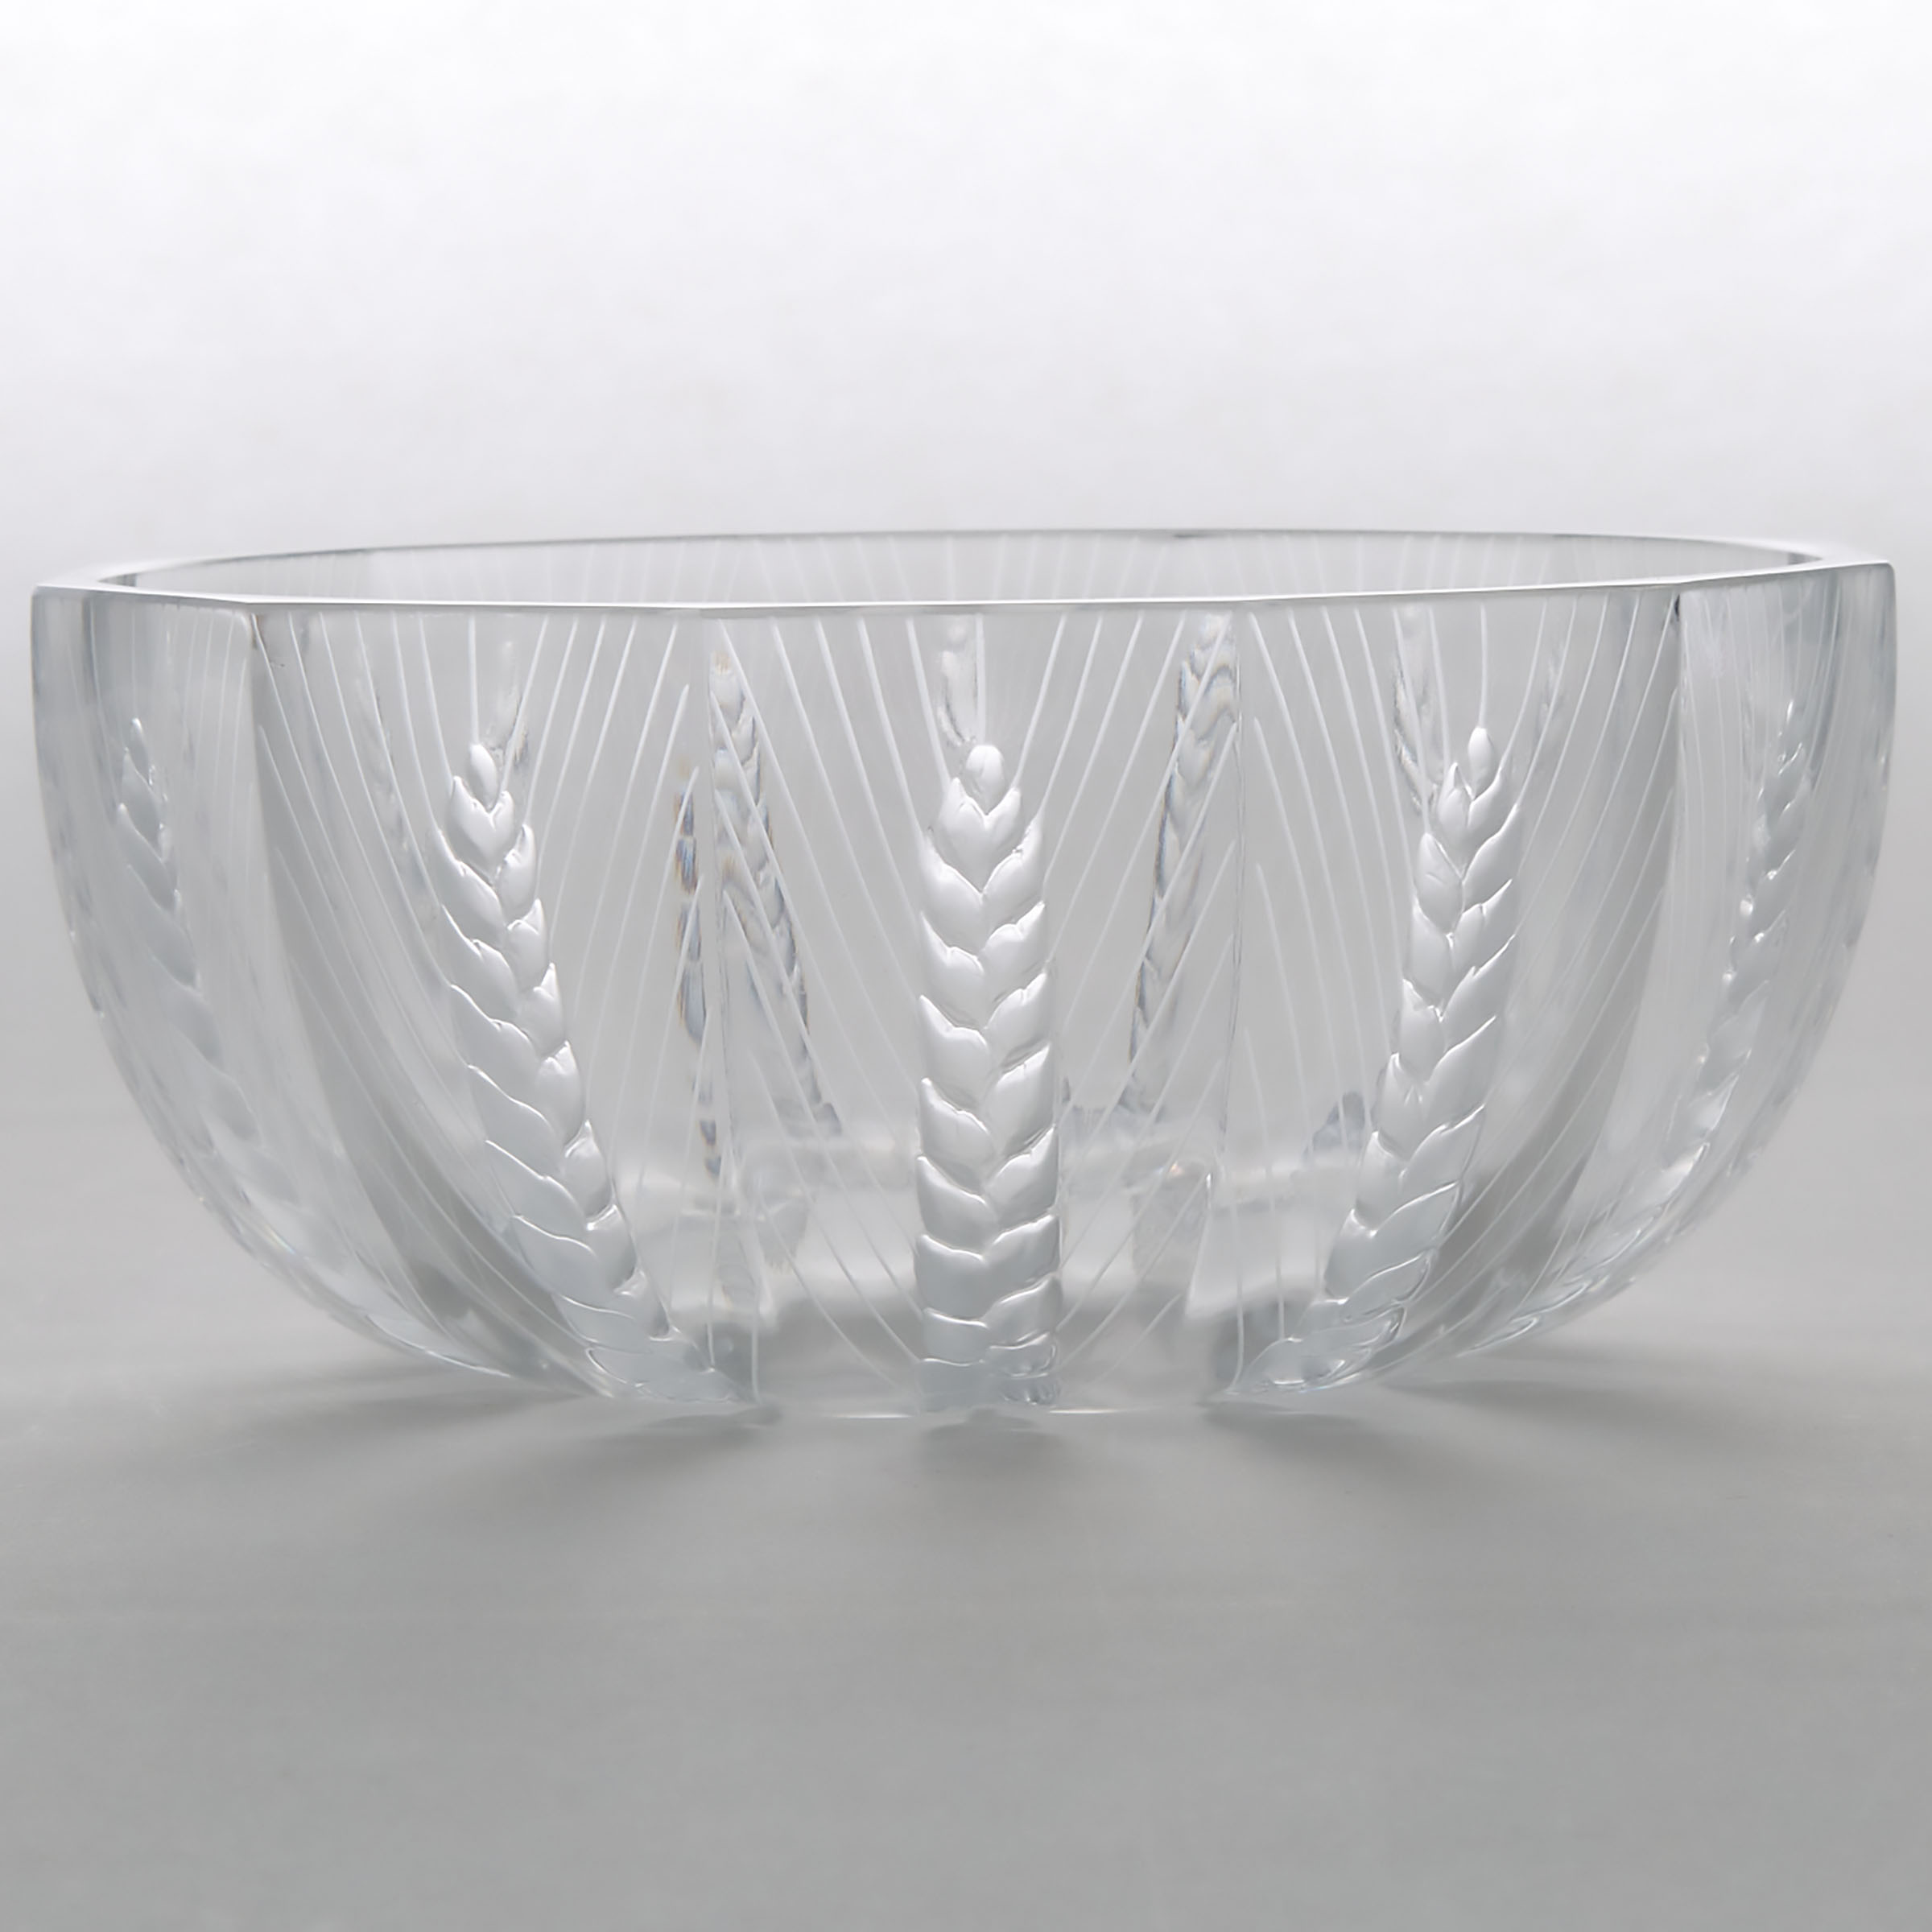 'Ceres', Lalique Moulded and Partly Frosted Glass Bowl, post-1945